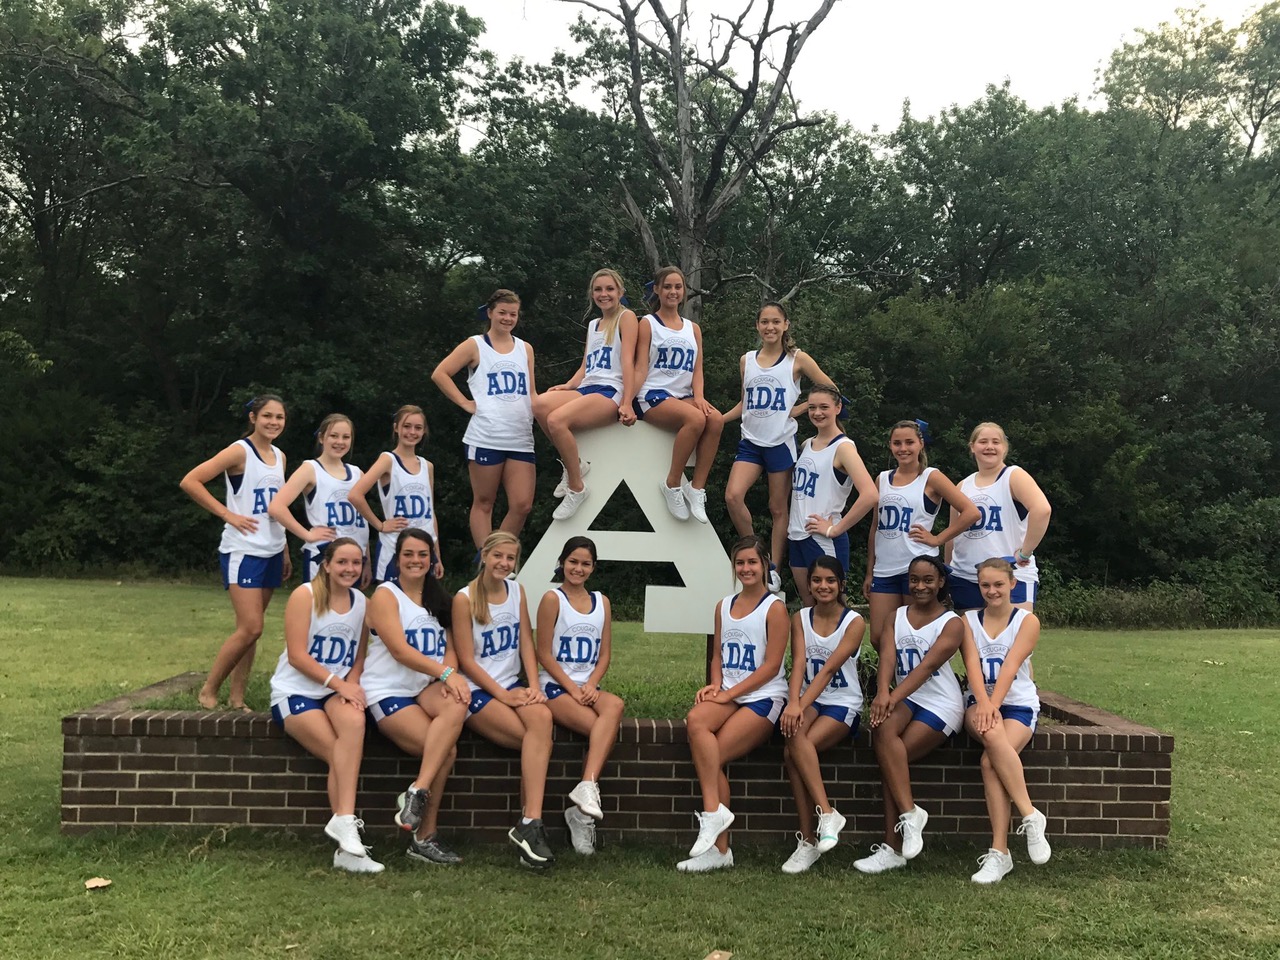 The Ada High cheerleaders pose for one last photo before heading off to cheer camp, not knowing they will be returning with a bid to the 2018 NCA All-Star National Competition in Dallas, Texas.